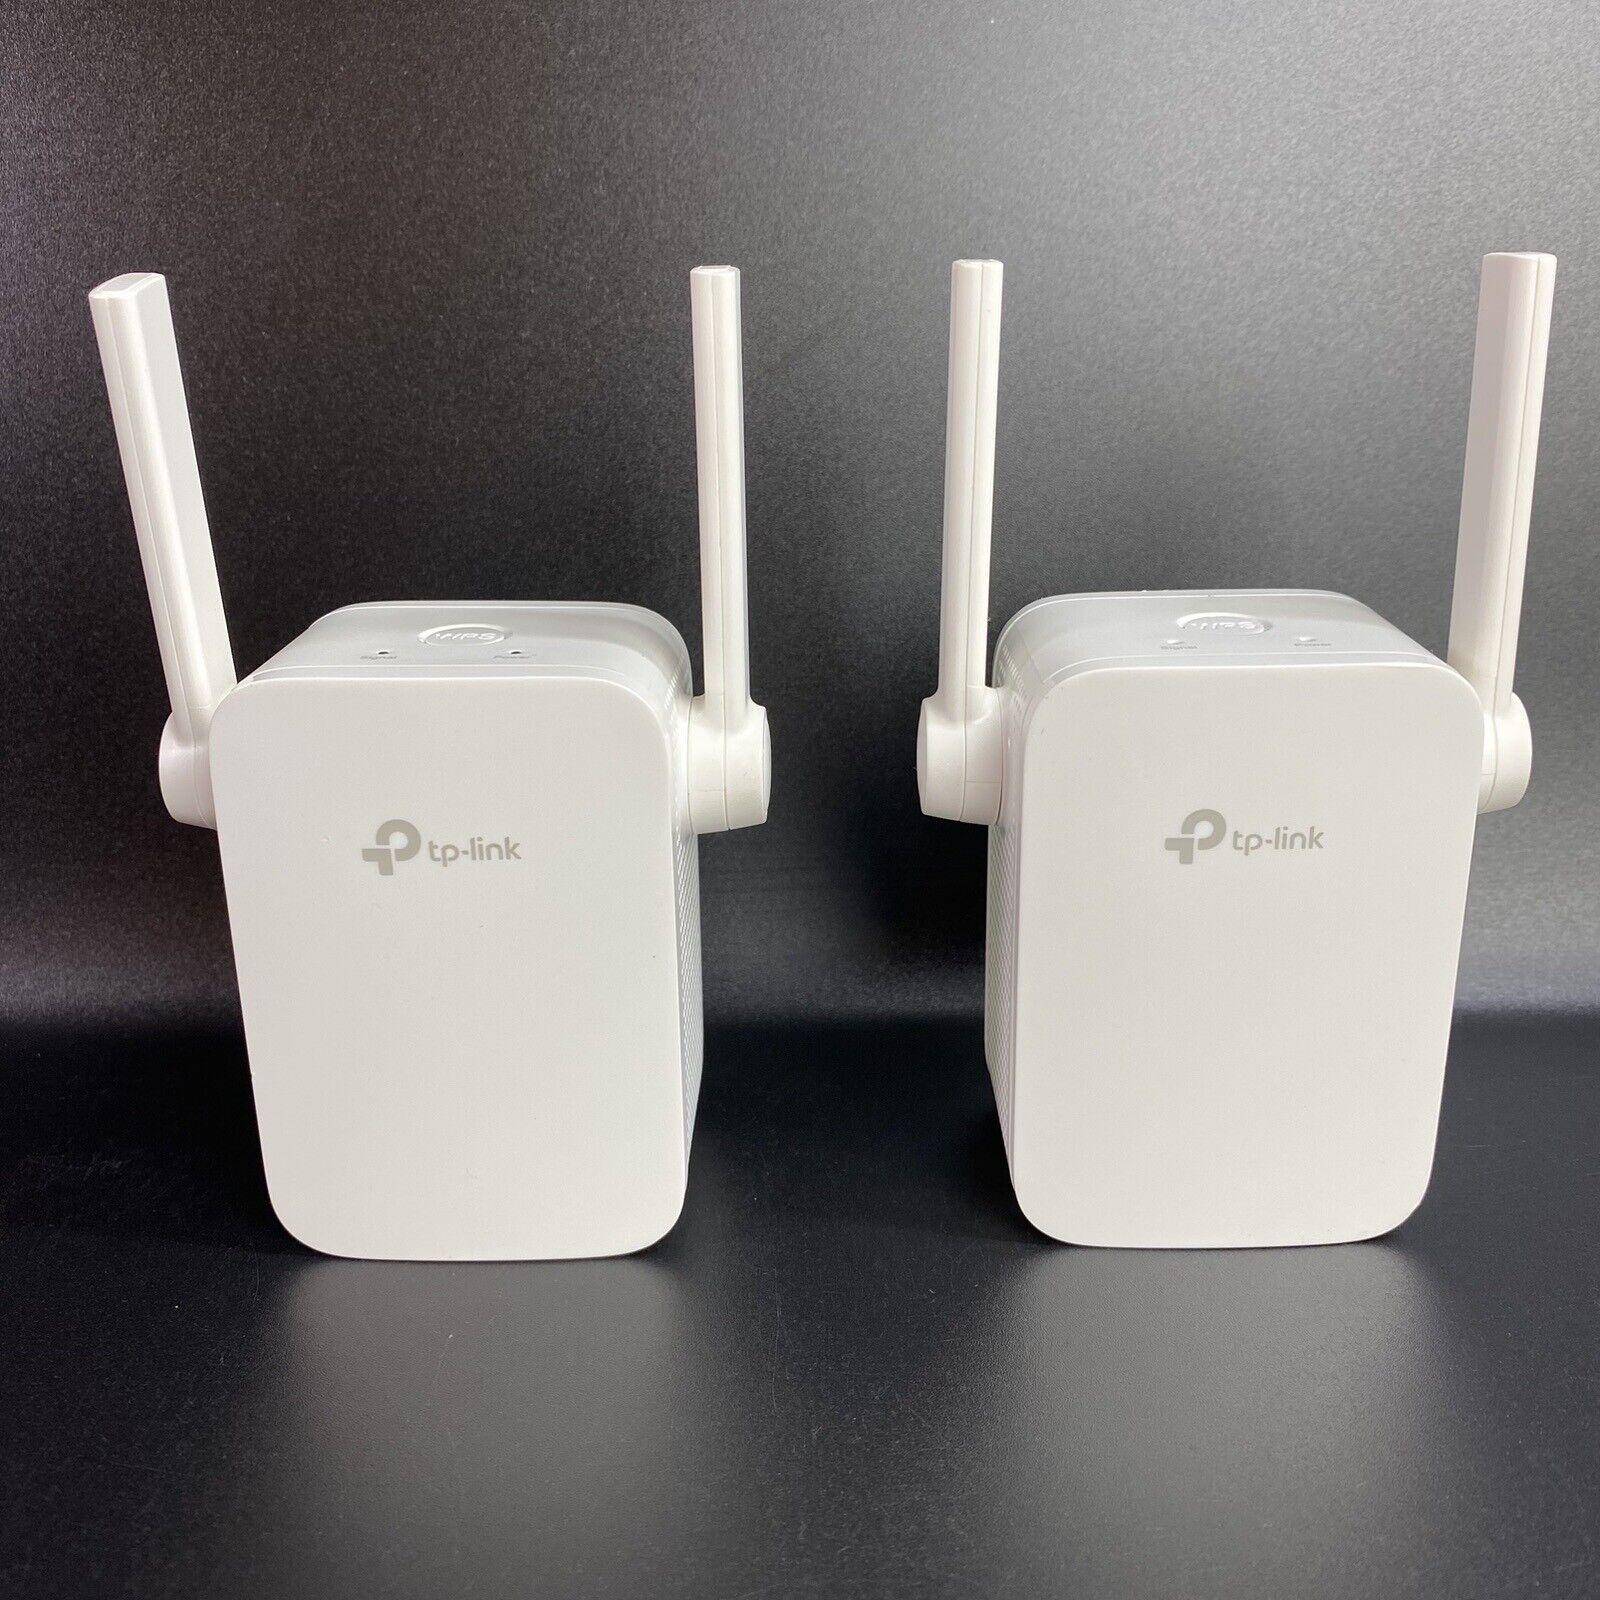 Pair of TP-Link TL-WA855RE 300Mbps WiFi Range Extender RE105  - TESTED